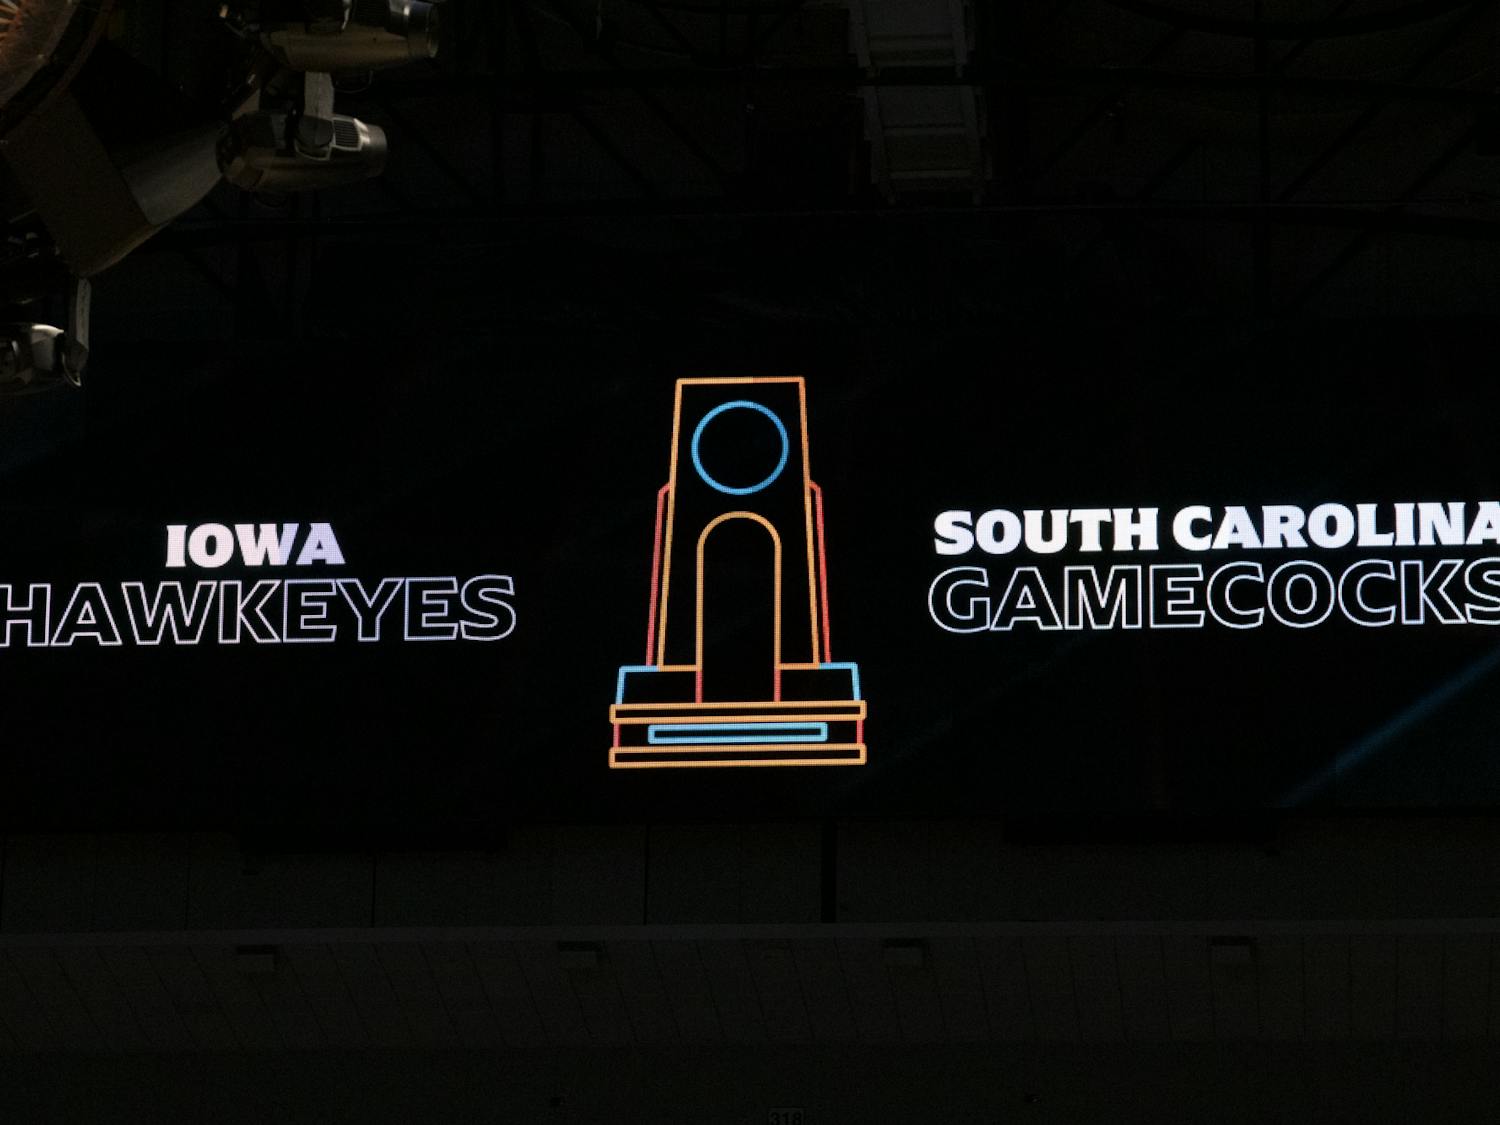 The American Airlines Center jumbotron displays the matchup between the University of South Carolina Gamecocks and the University of Iowa Hawkeyes on March 31, 2023. The matchup brought a record number of viewers, with 5.5 million people tuning in to ESPN on average and 6.6 million views at its peak.